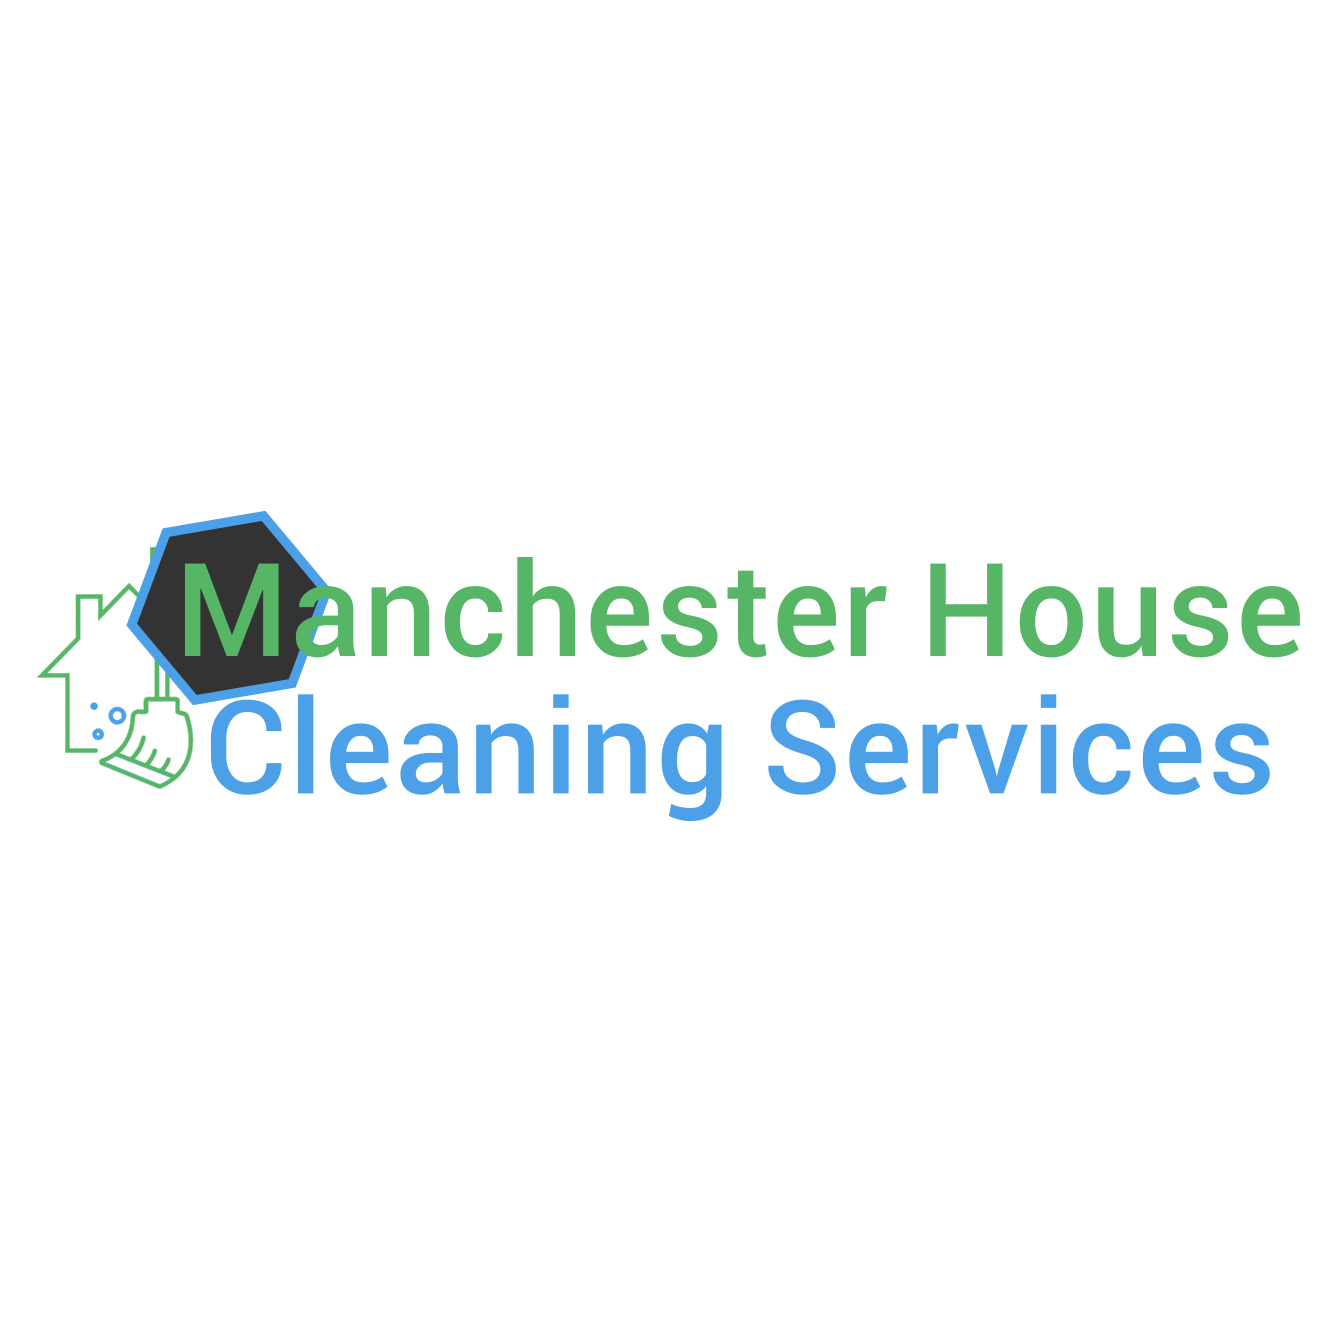 manchester house cleaning services logo